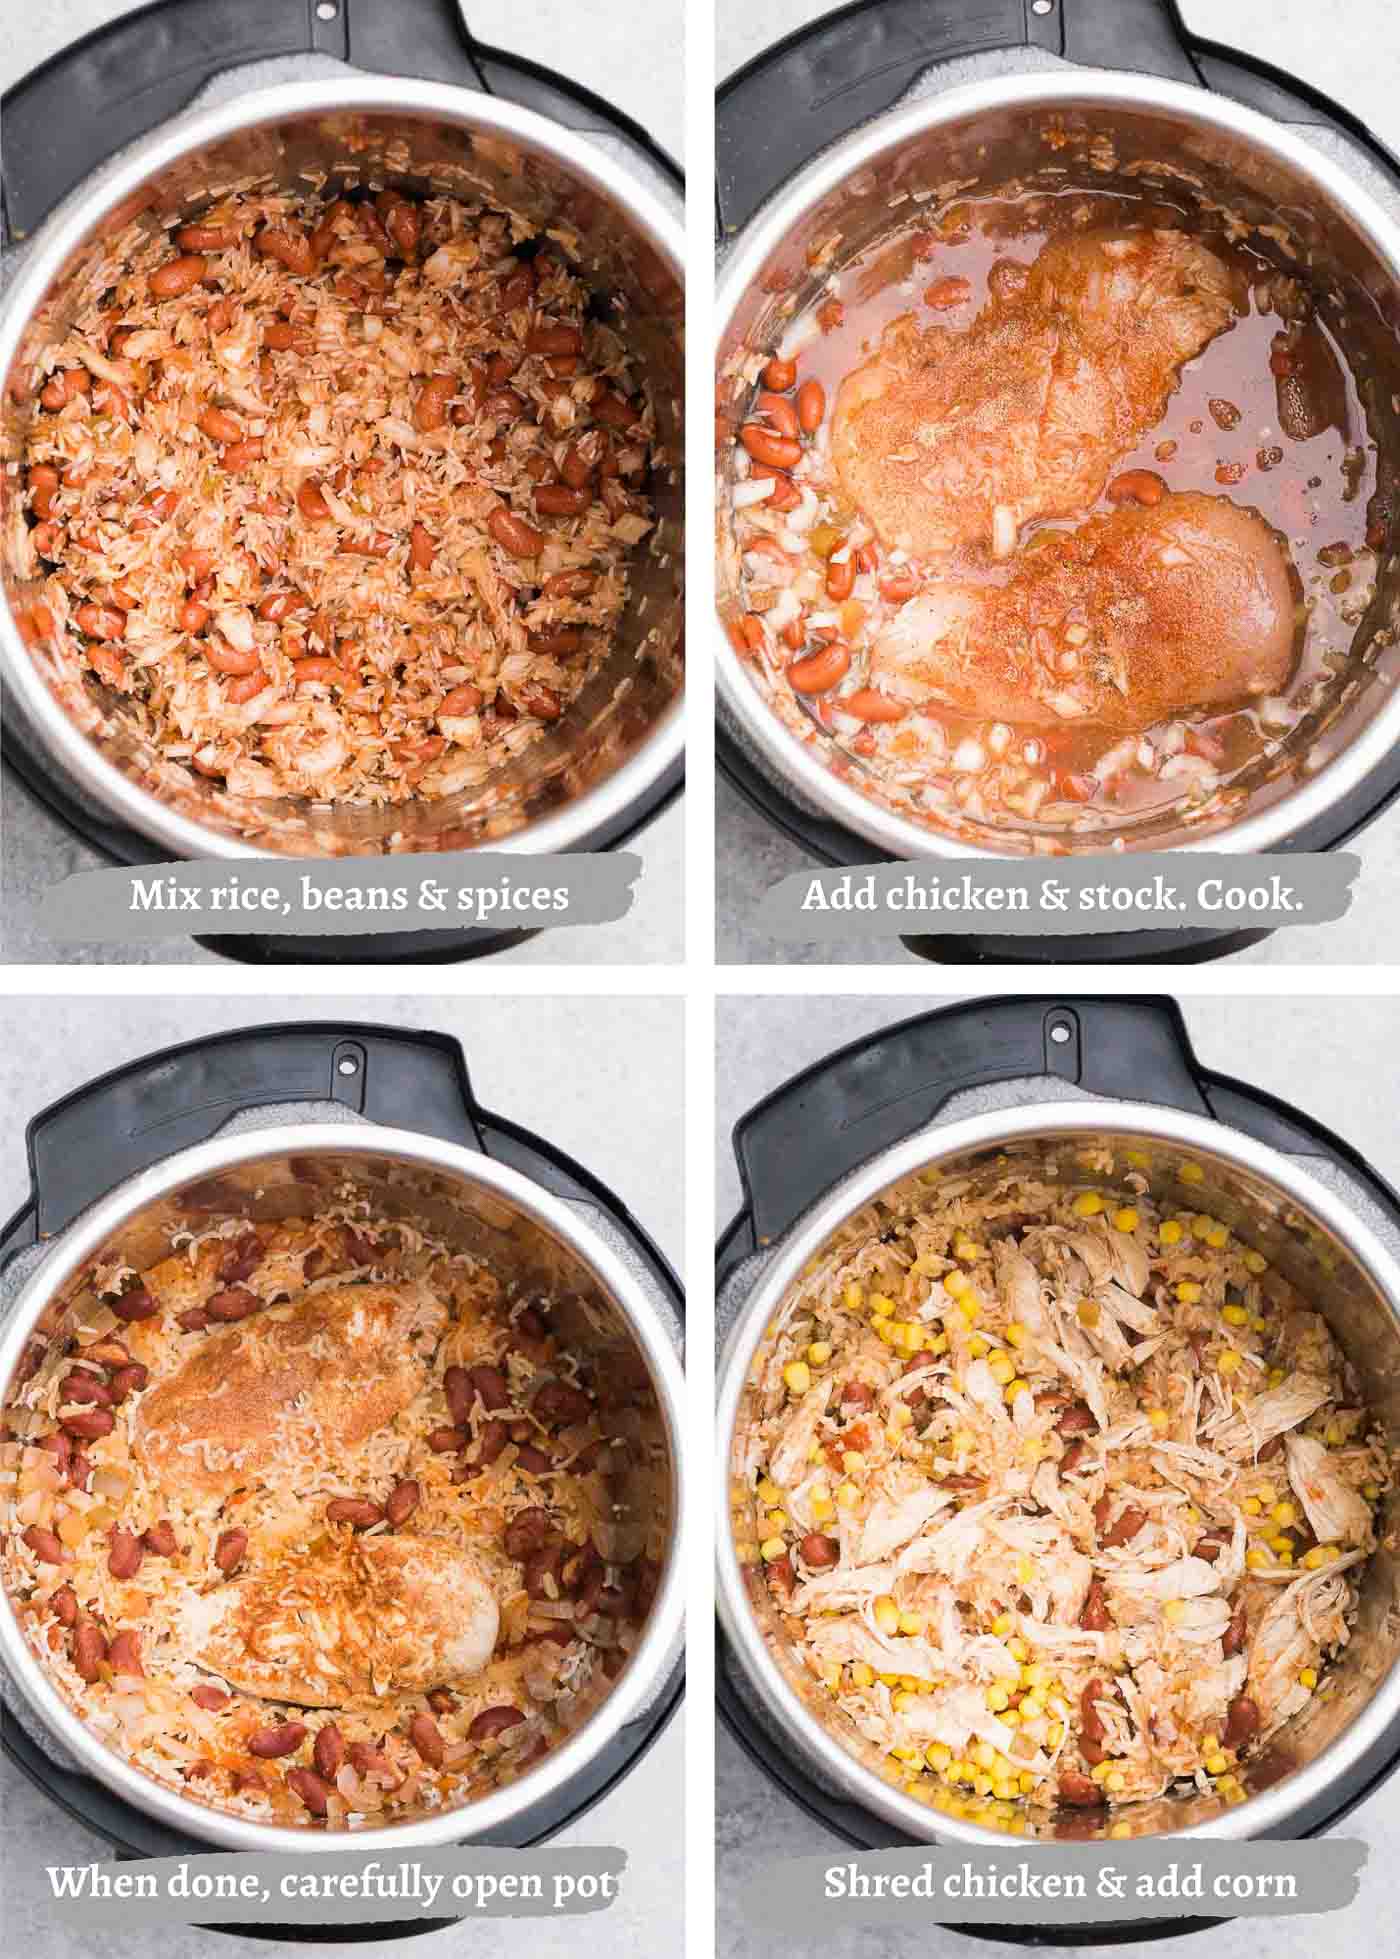 instructions for making southwest chicken and rice in the pressure cooker